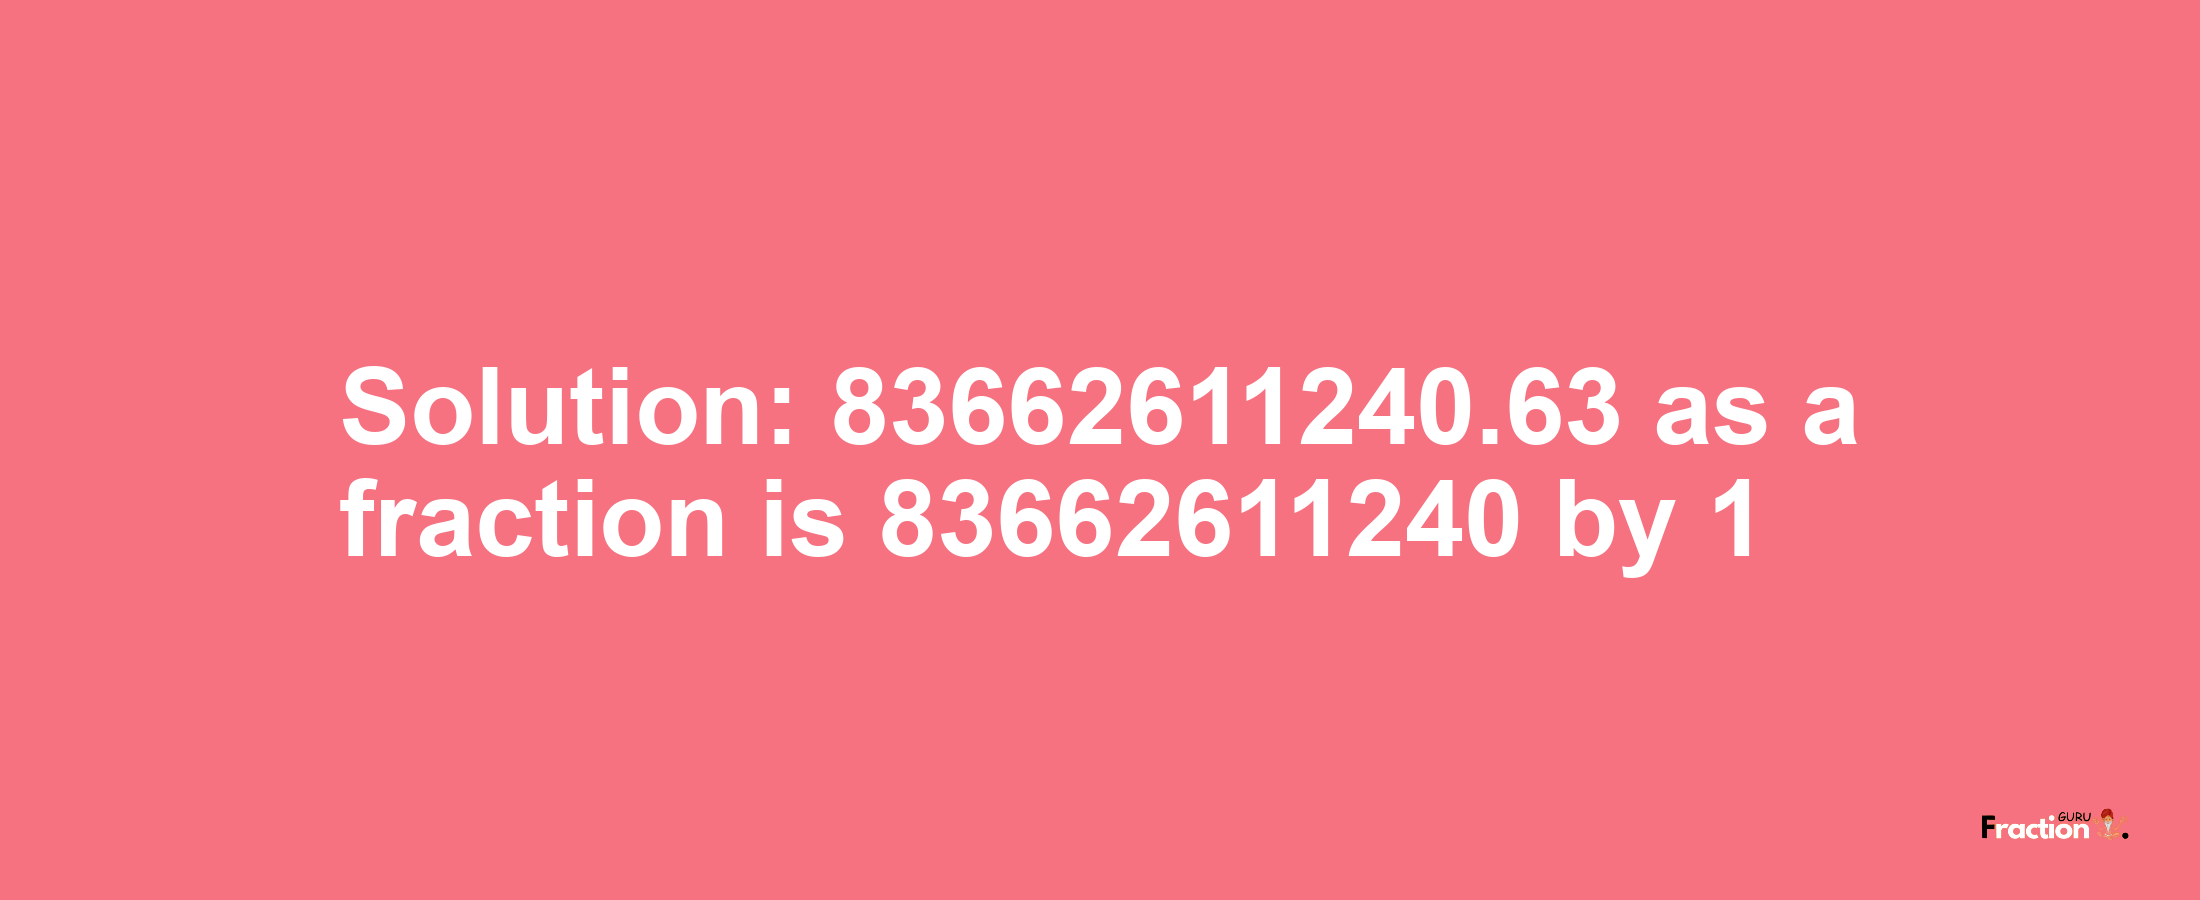 Solution:83662611240.63 as a fraction is 83662611240/1